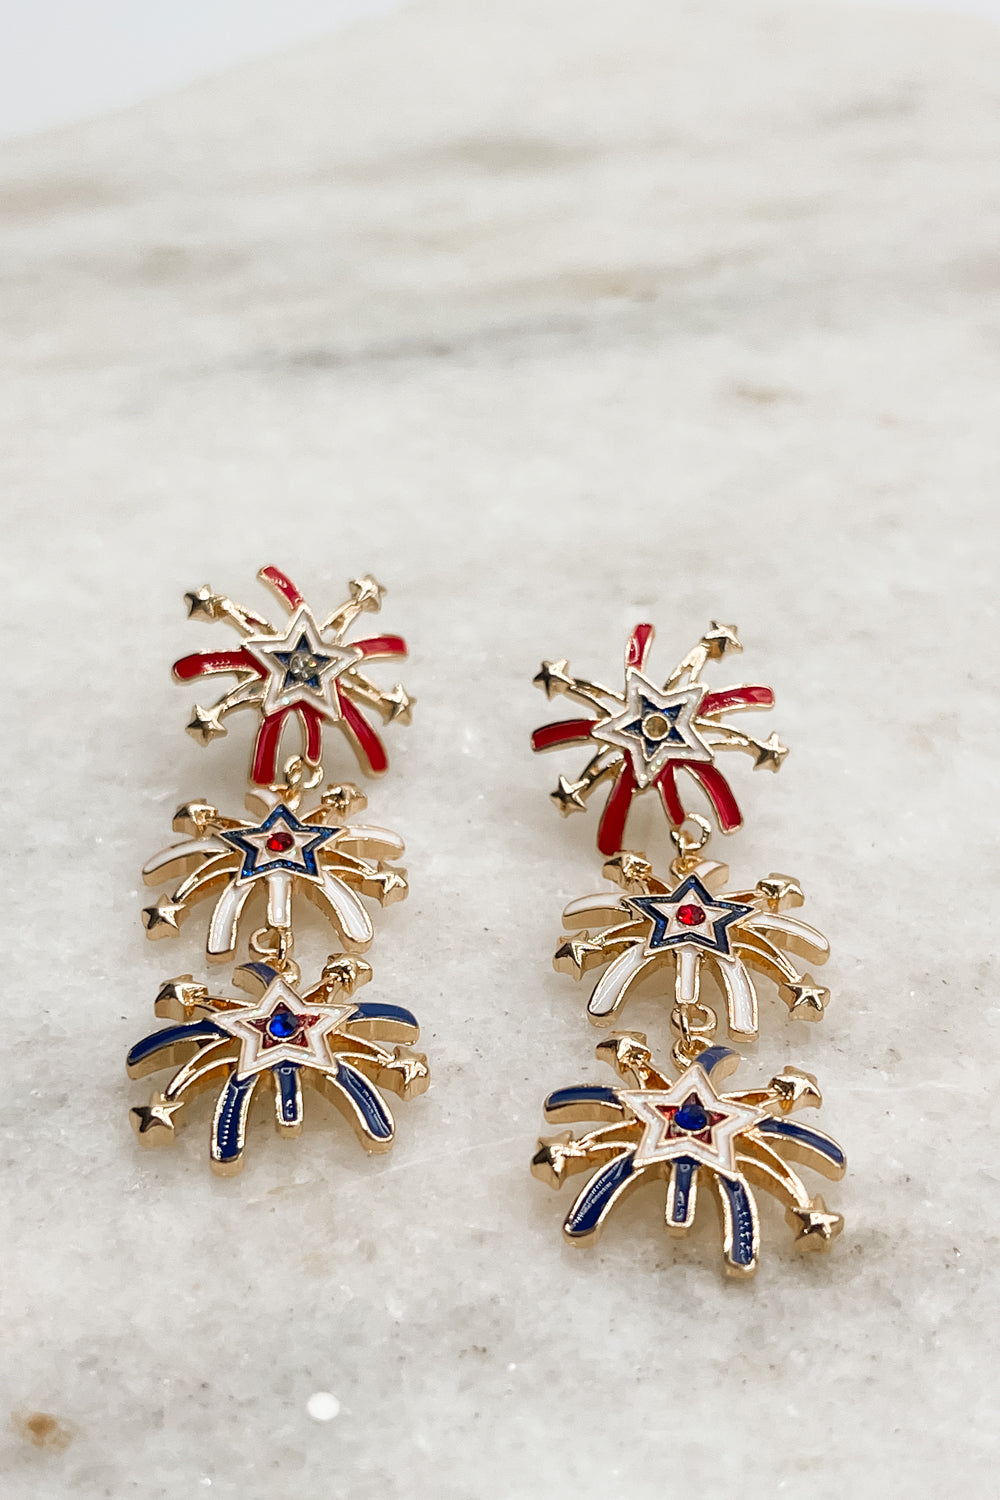 Earrings are shown straight-on lying on a neutral background. They are dangle earrings with three red, white, & blue firework-shaped charms.